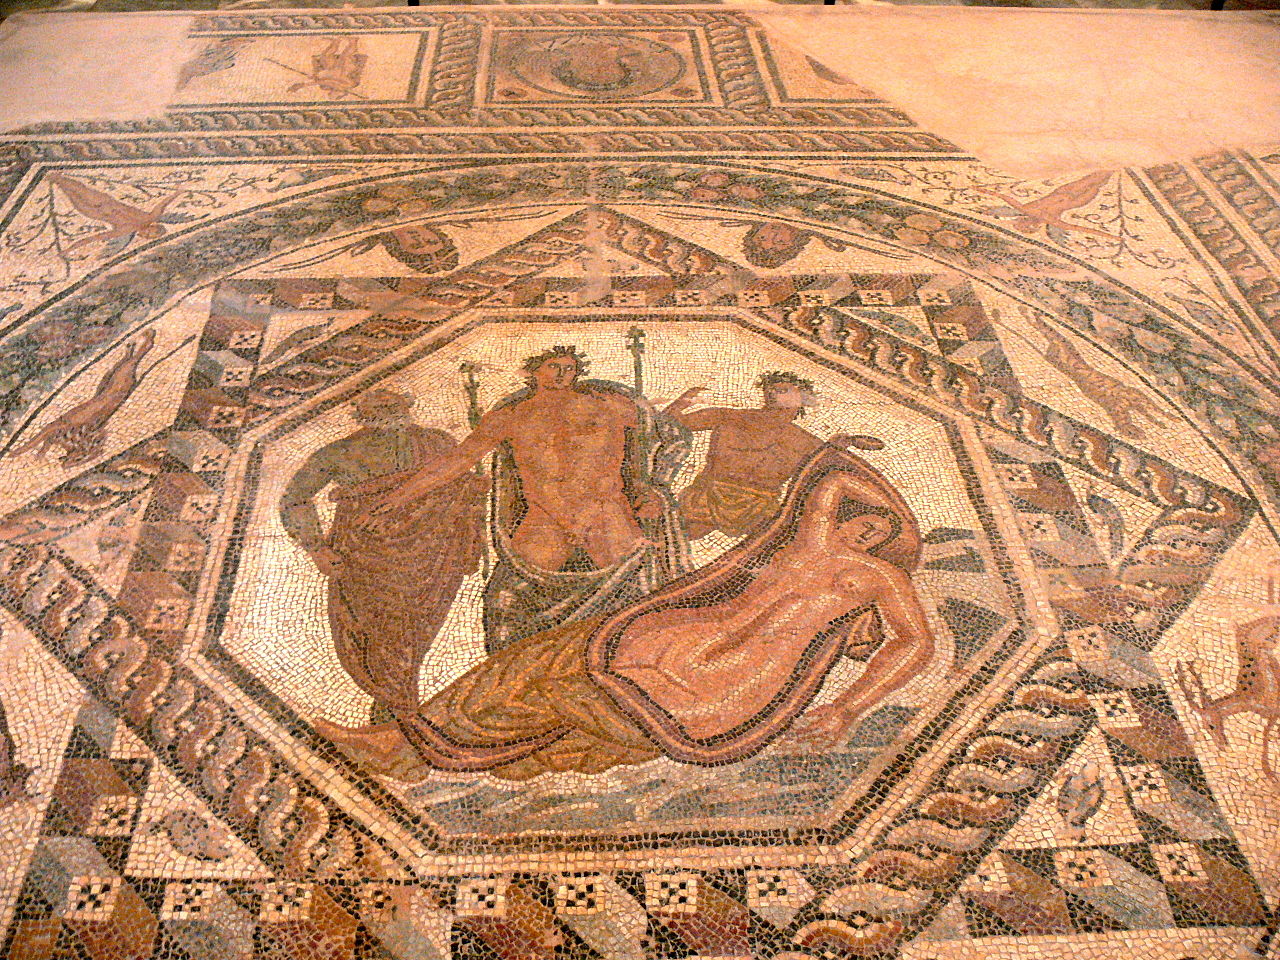 https://commons.wikimedia.org/wiki/Category:Ancient_Roman_art_in_the_Archaeological_Museum_(Chania)#/media/File:AMC_-_Mosaik_2.jpg